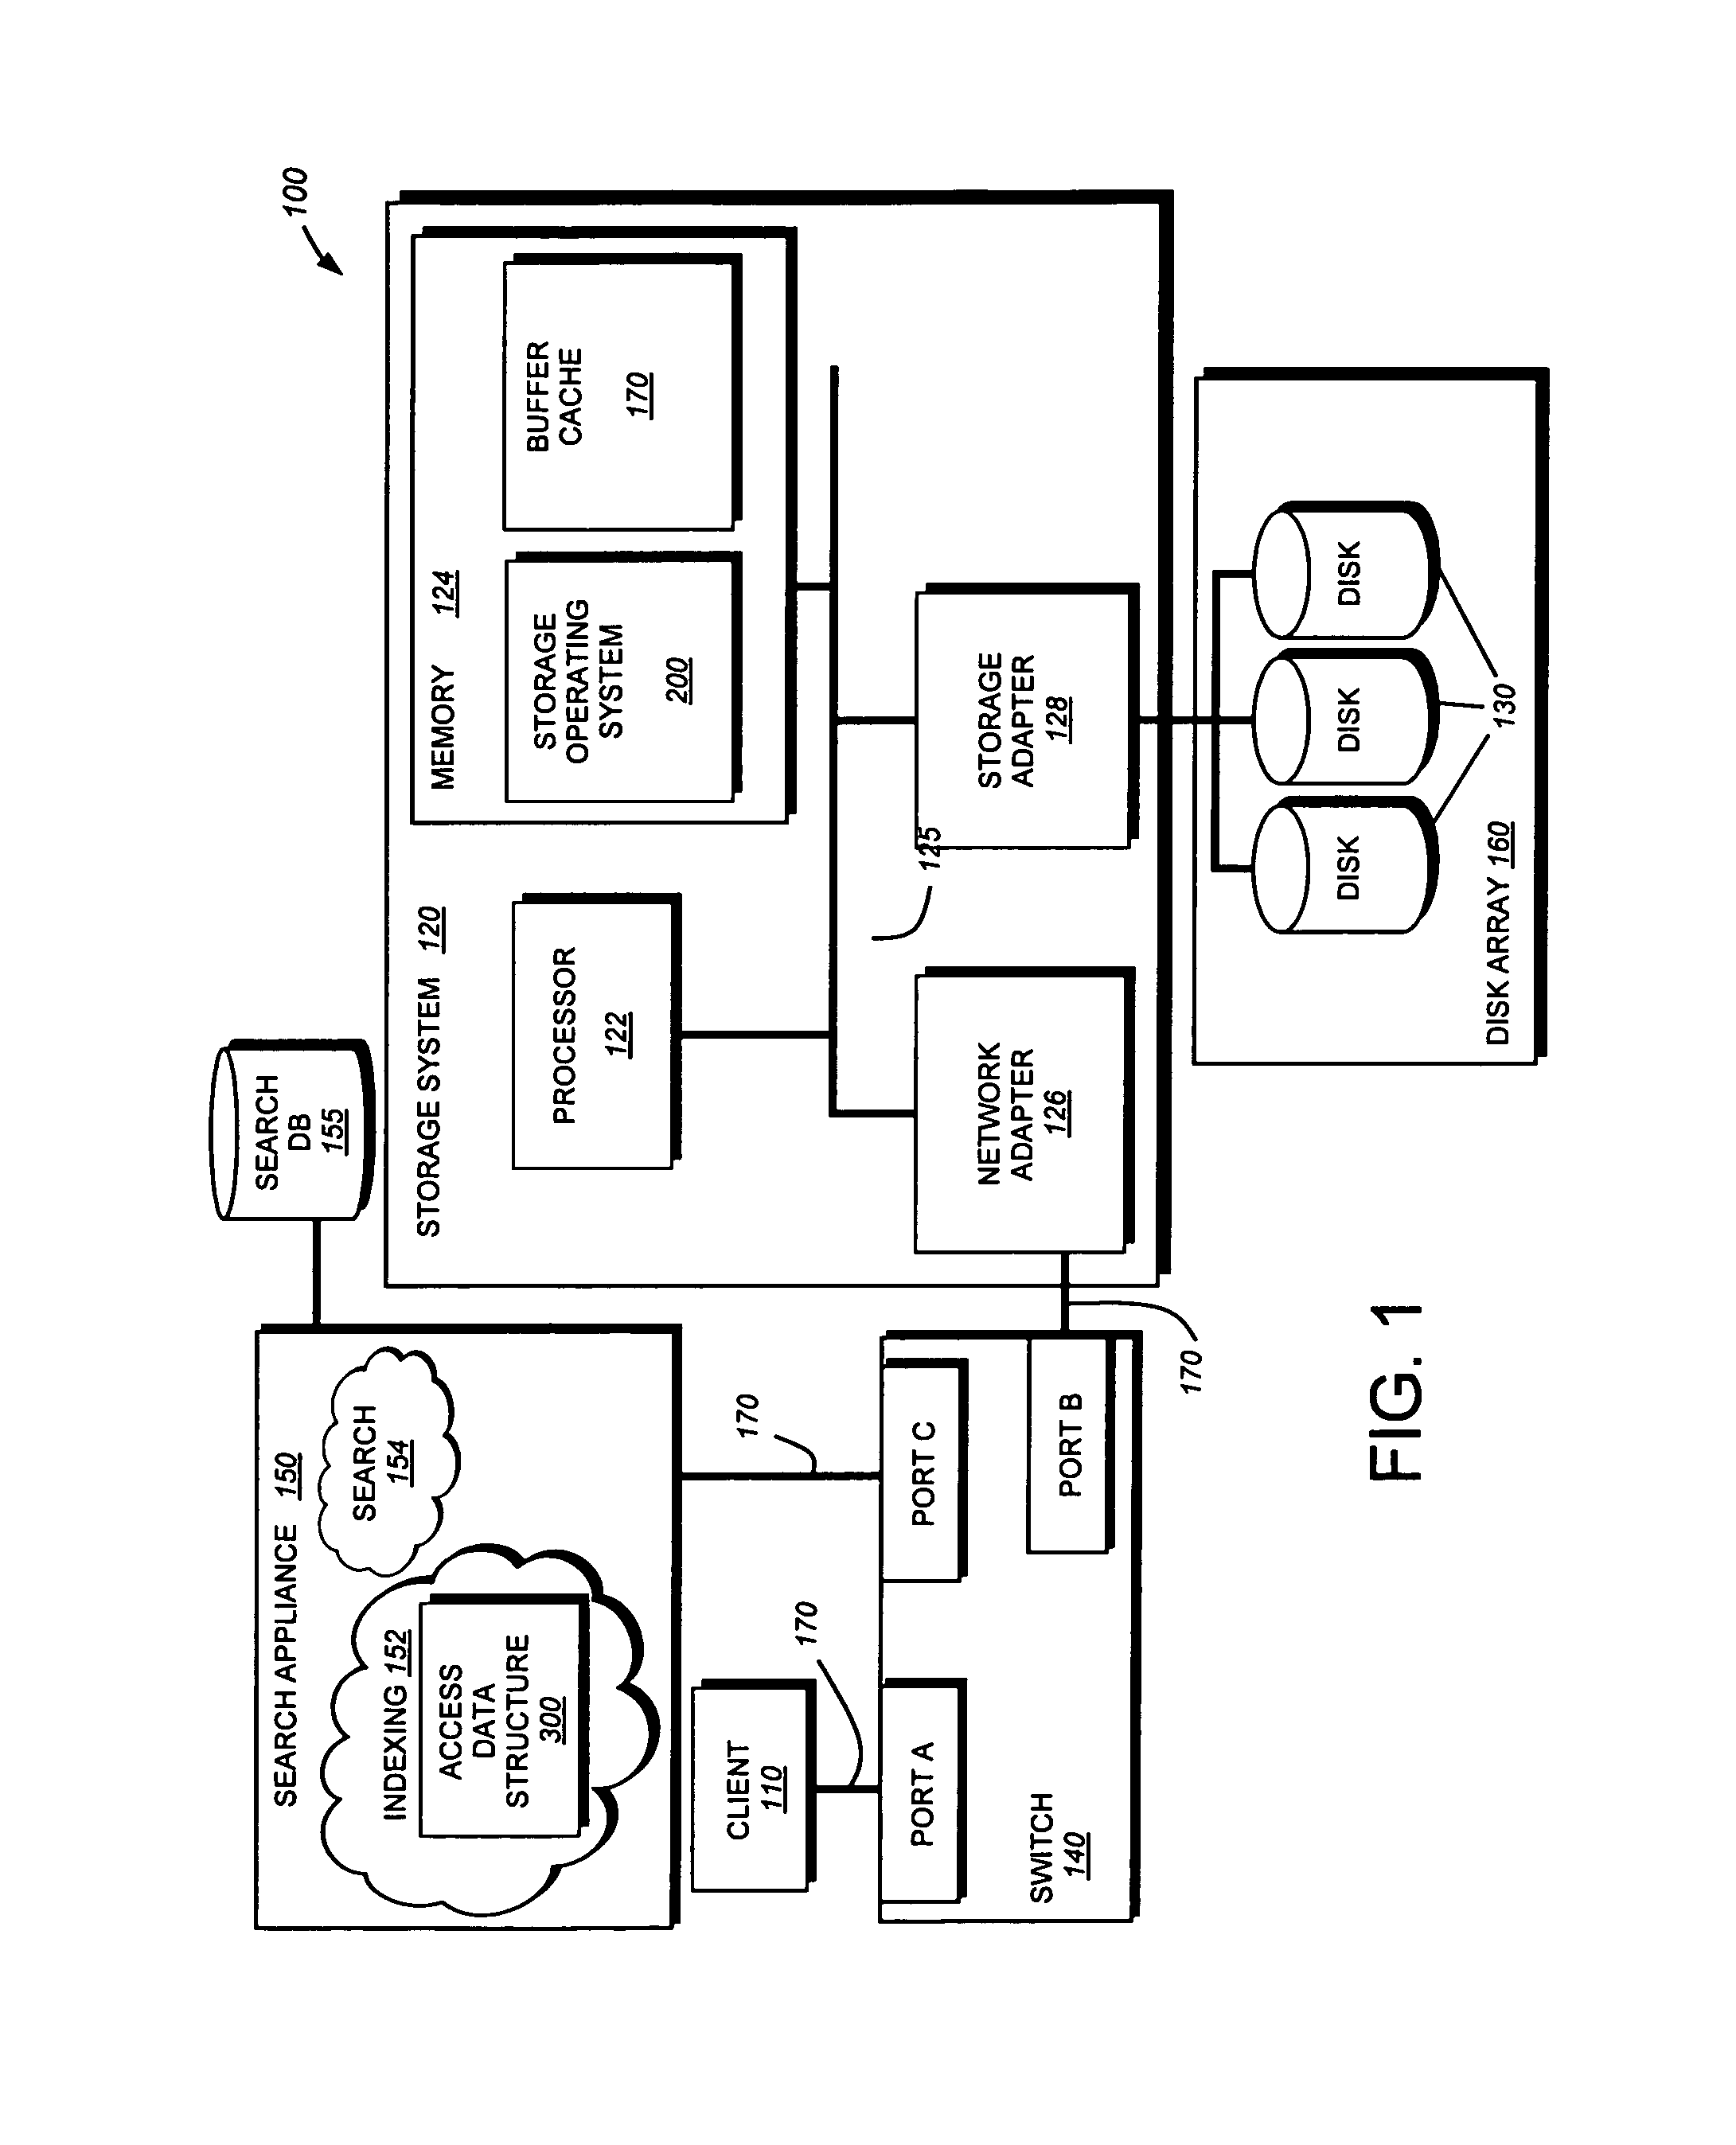 System and method for improving the relevance of search results using data container access patterns